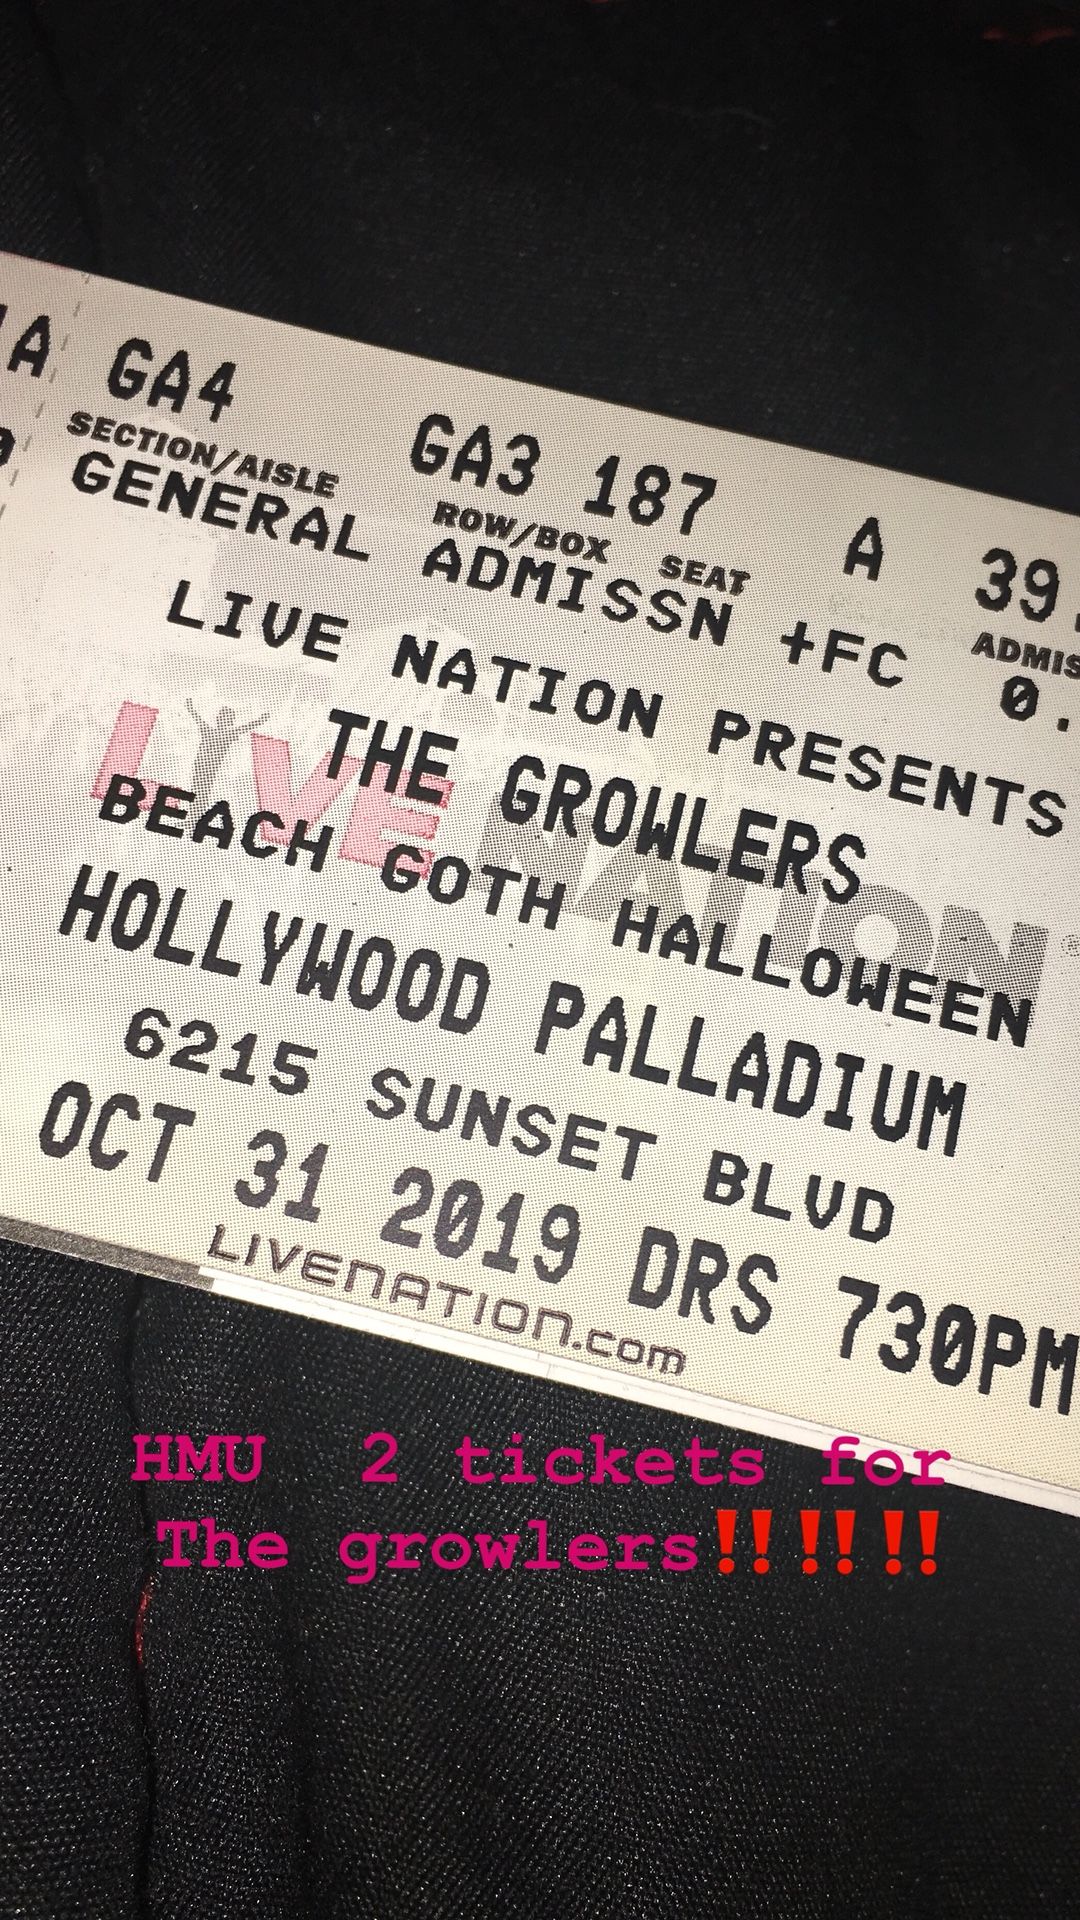 2 tickets for the growlers